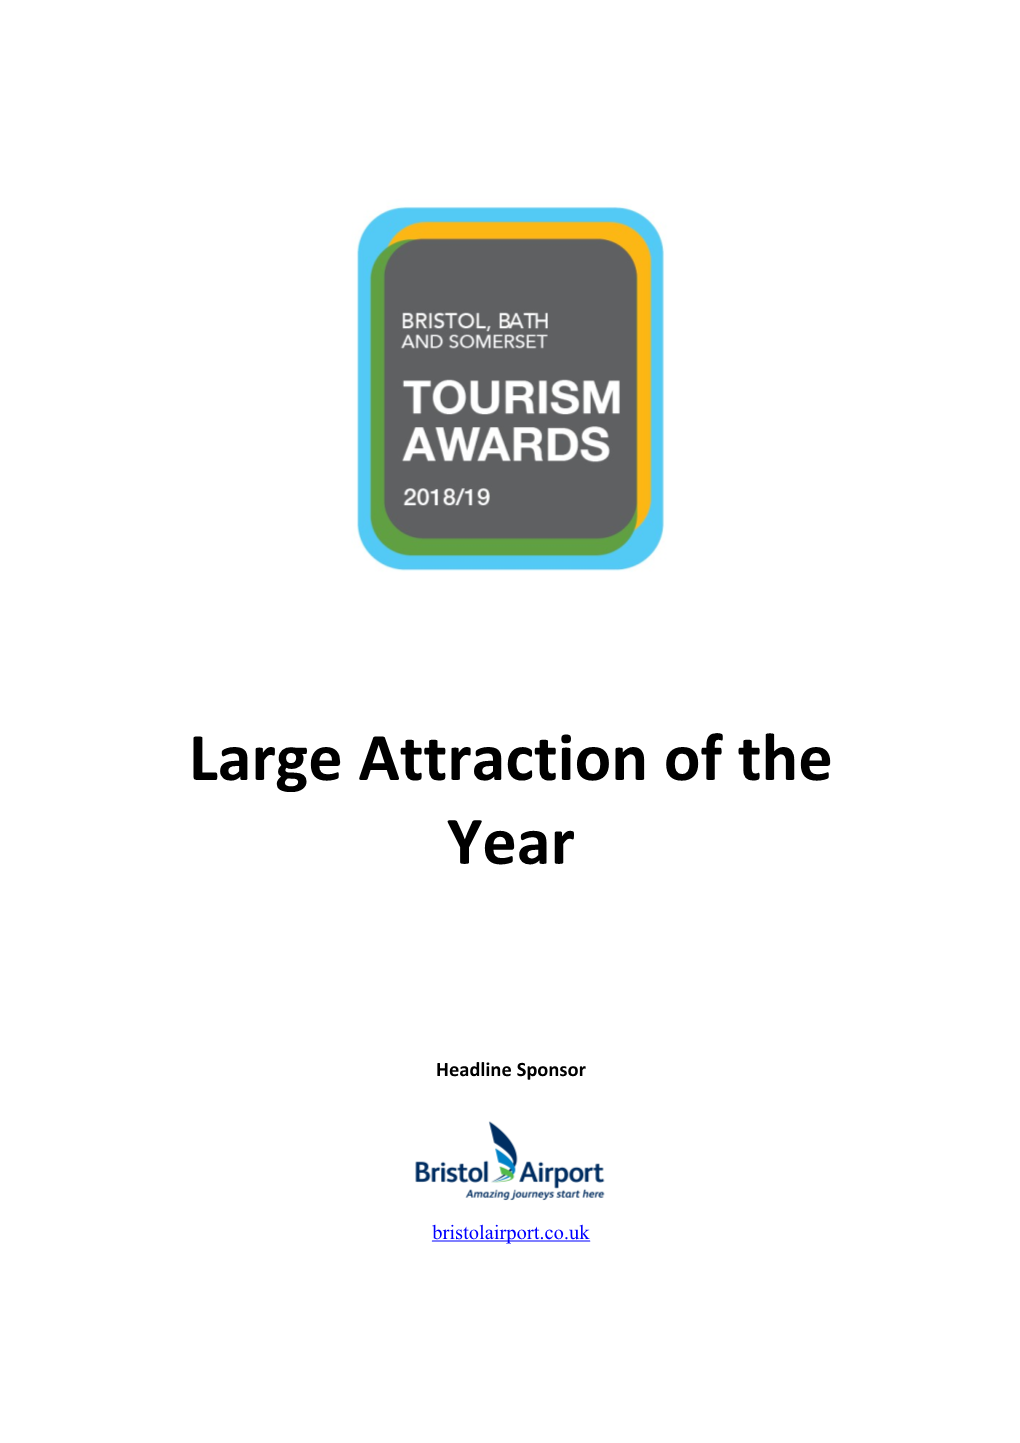 Large Attraction of the Year